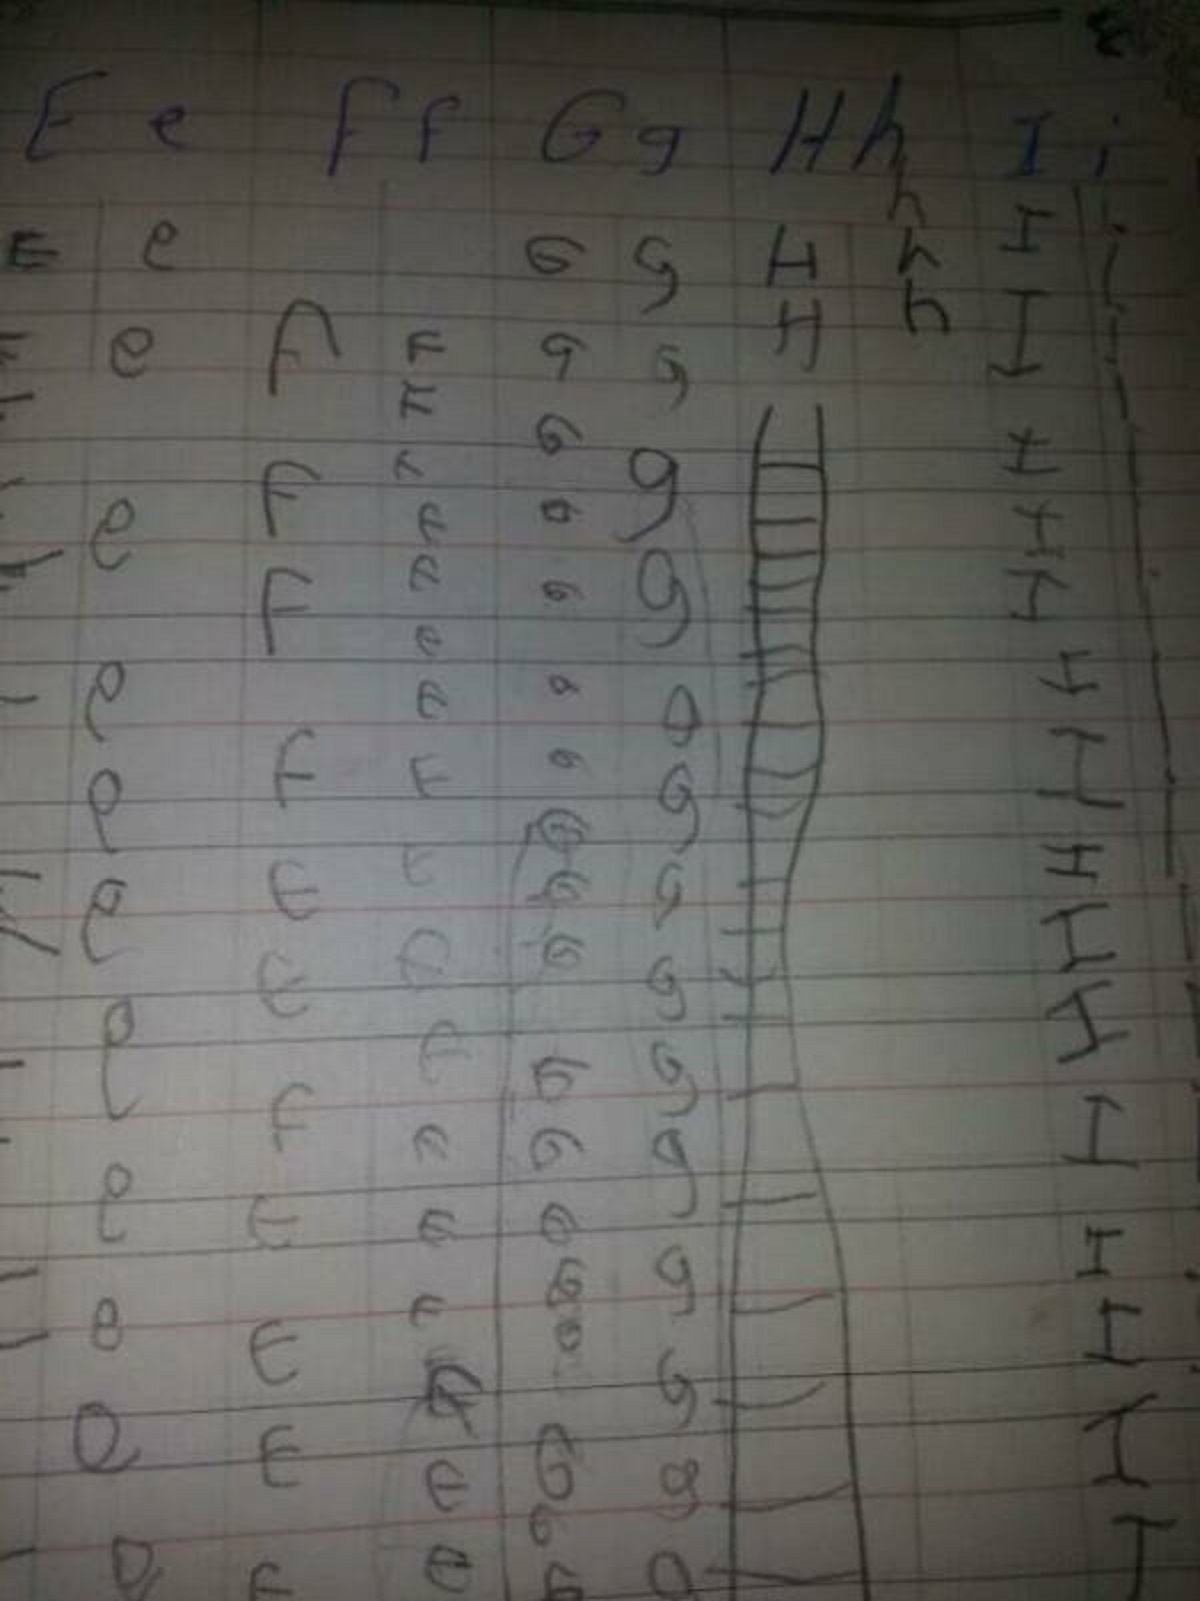 “My lazy little brother learning writing English letters.”